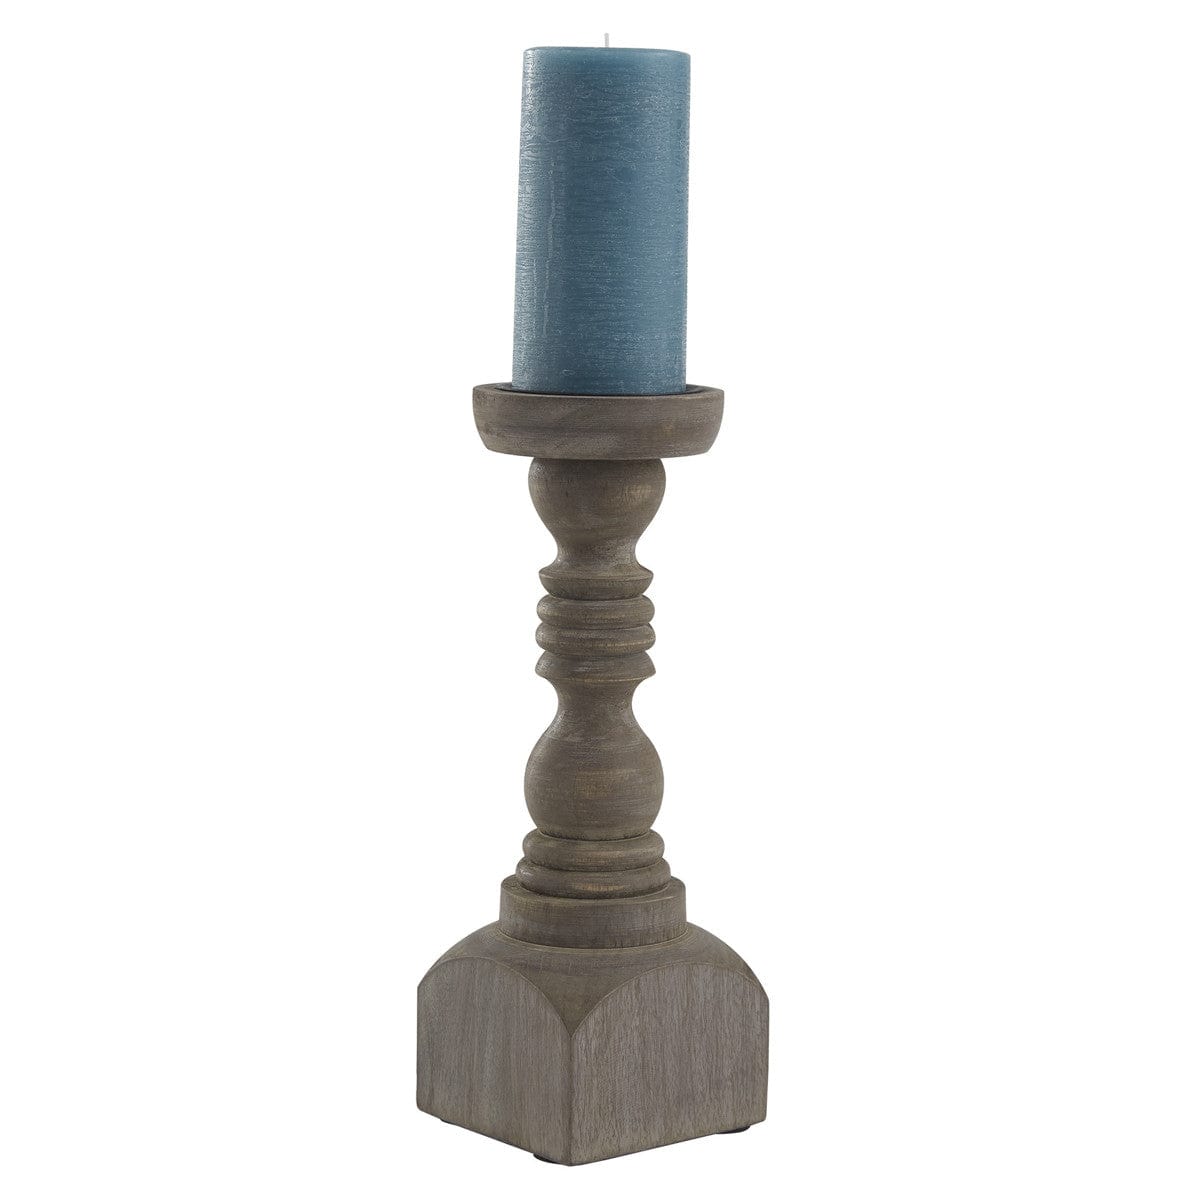 Wood Brighton Candlestick Candle Holder For Pillar Candles - 12" High-Park Designs-The Village Merchant